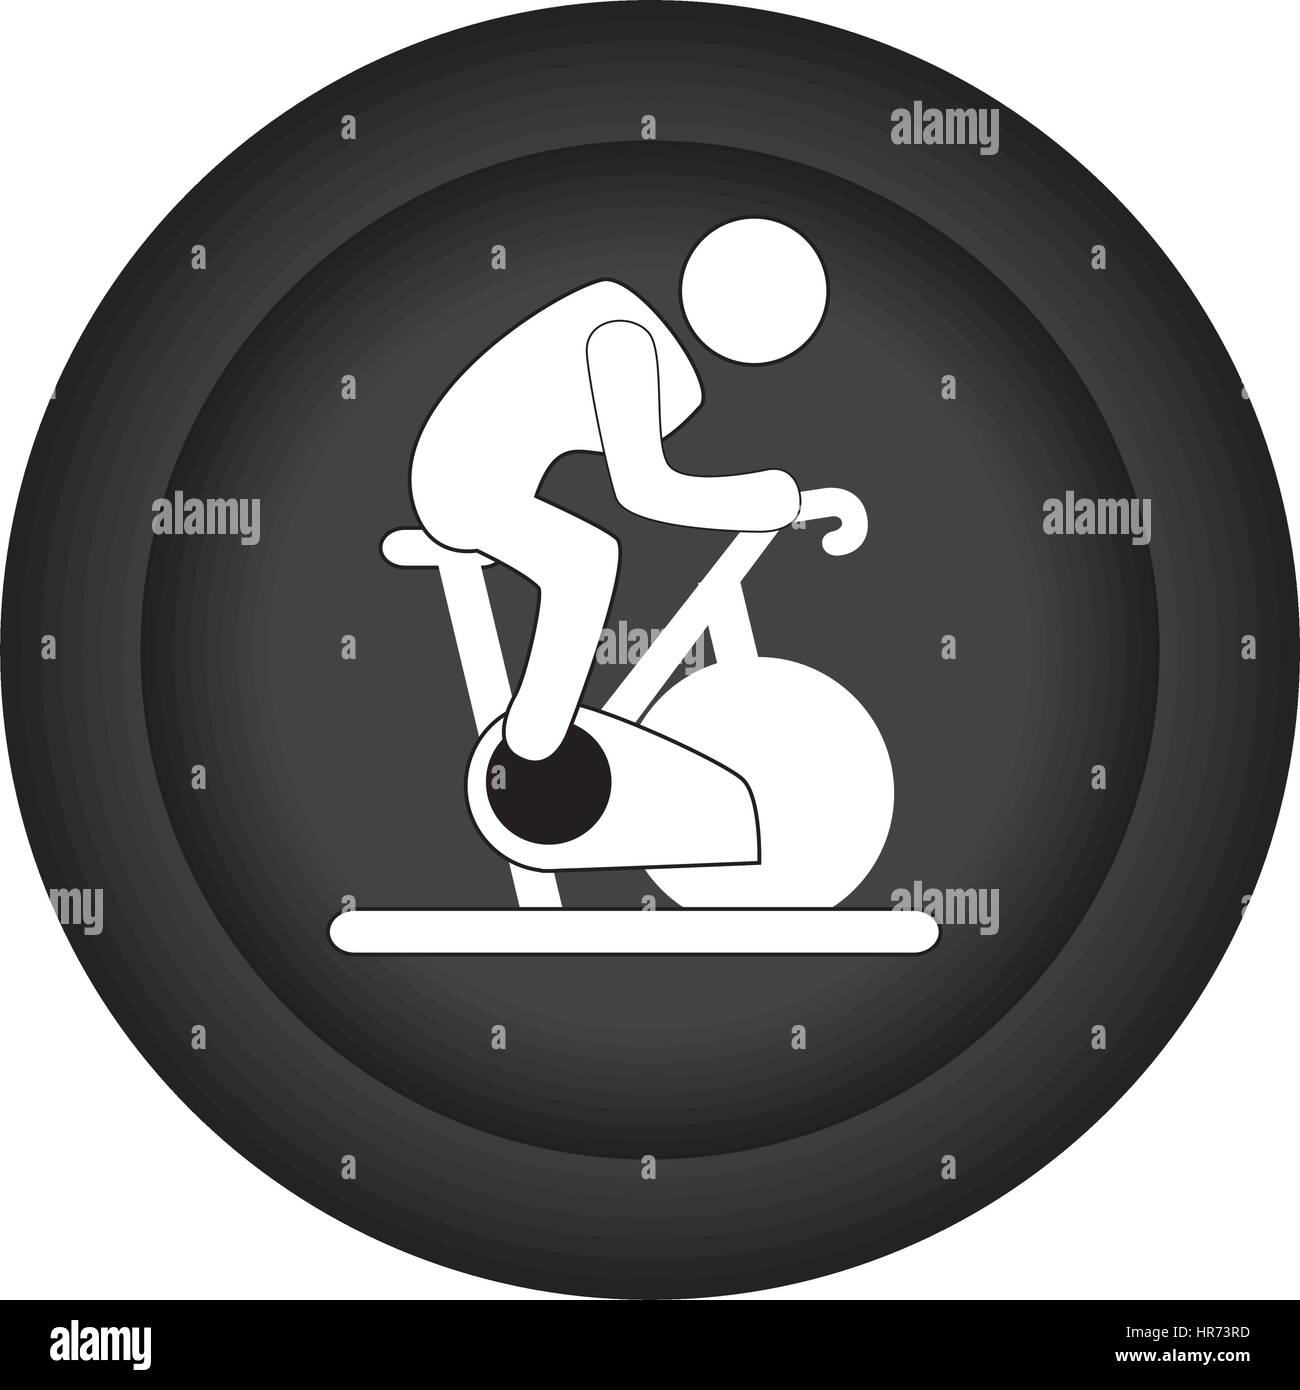 monochrome circular border with silhouette man in spinning bike Stock Vector